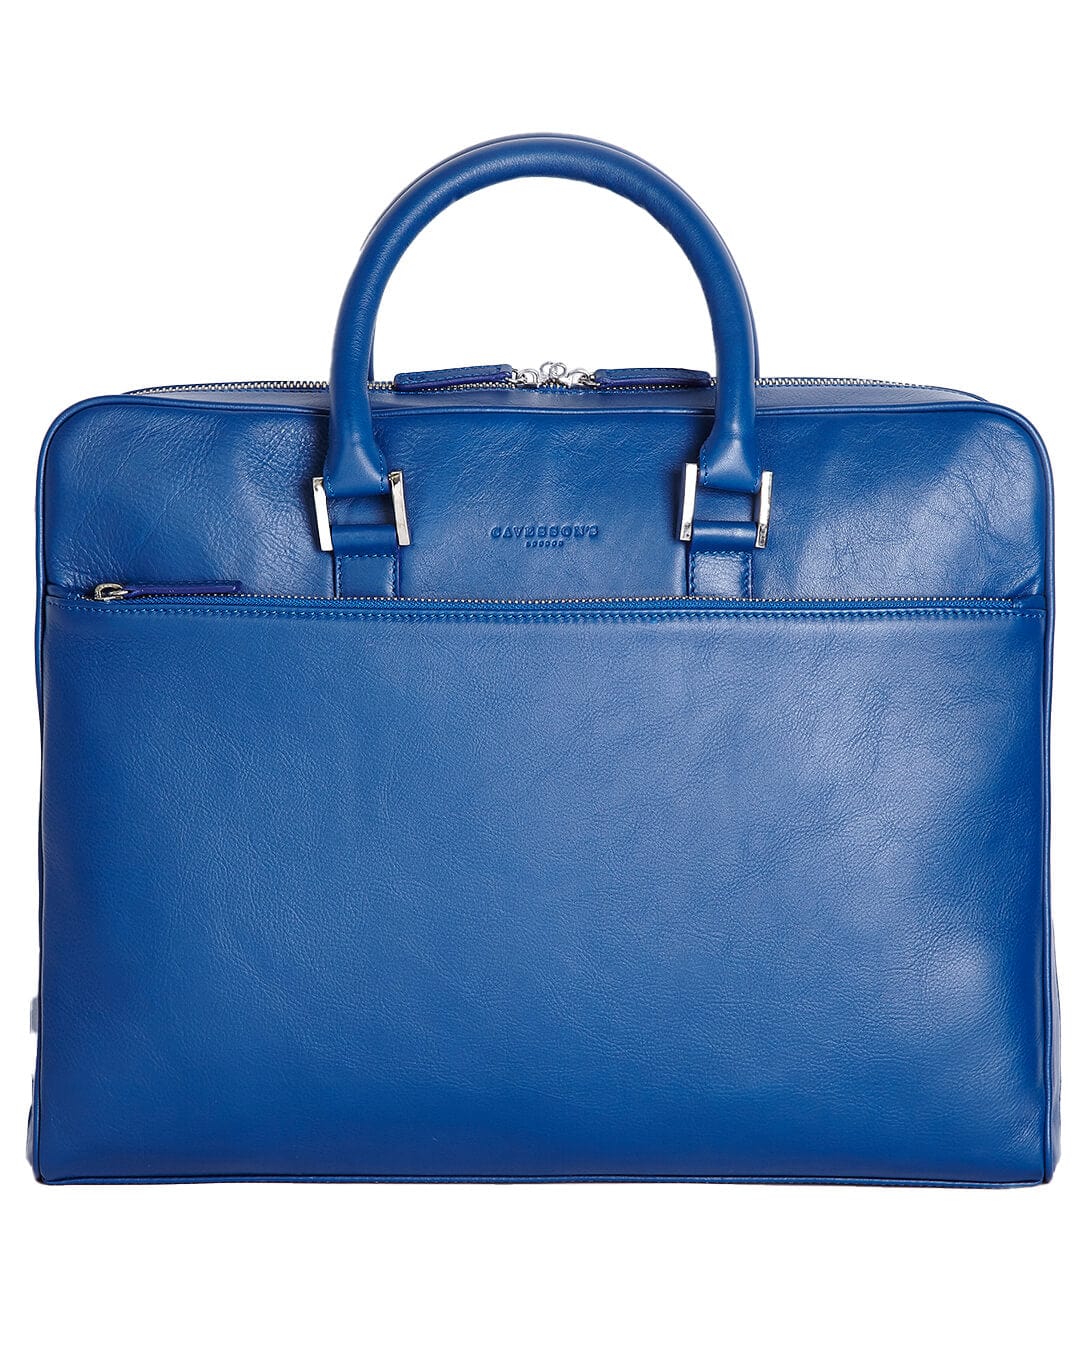 Cavesson&#39;s Bags Cavesson&#39;s Blue Calf Briefcase